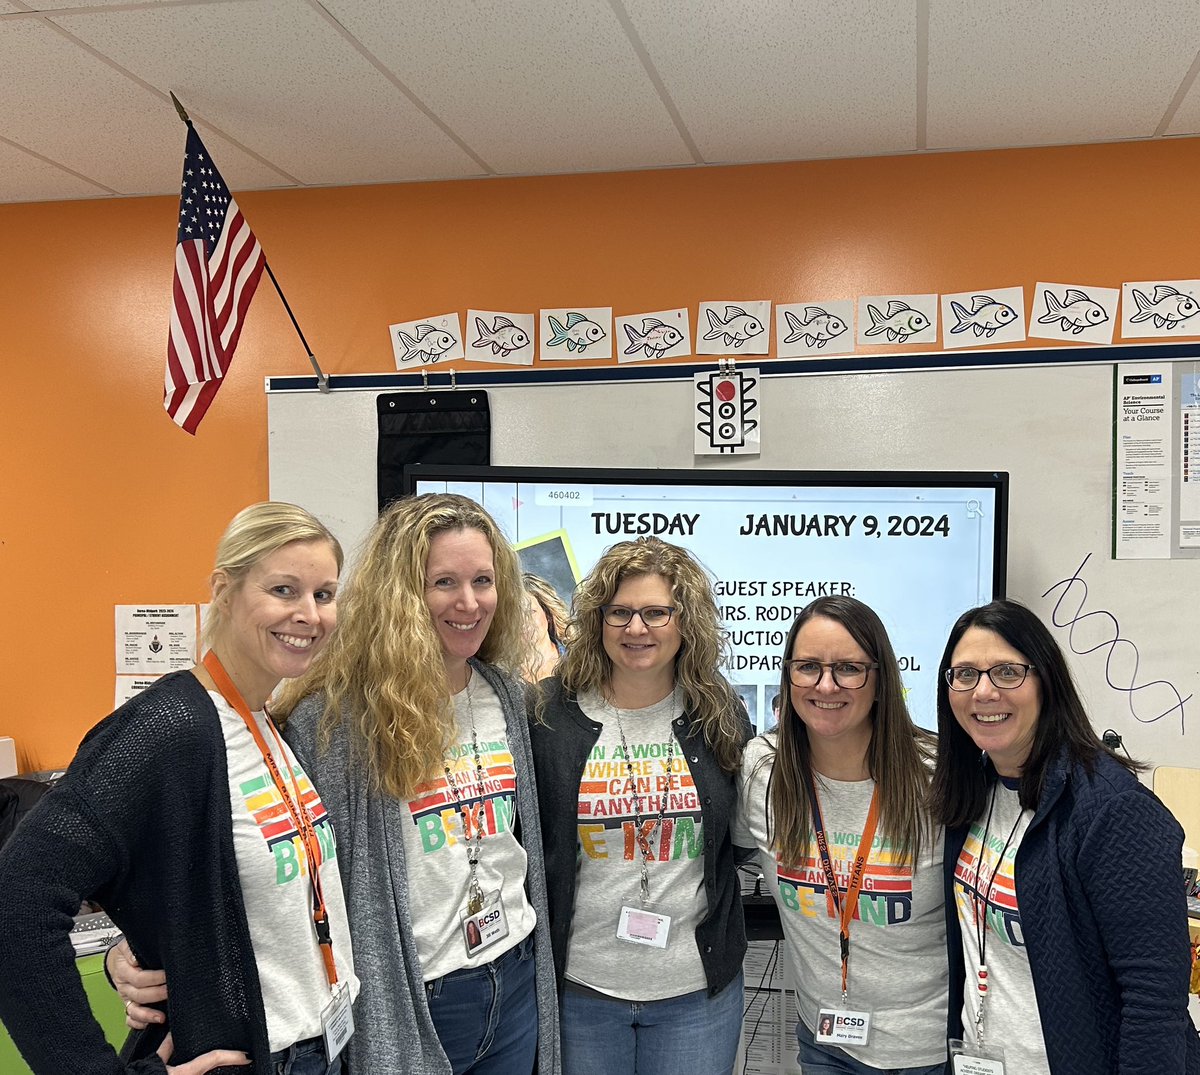 Team Up Tuesday! The LINK Crew Coordinators teamed up to celebrate @SITG_Browns and encourage all Titans to come to school everyday. Attendance Matters. #StayInTheGame